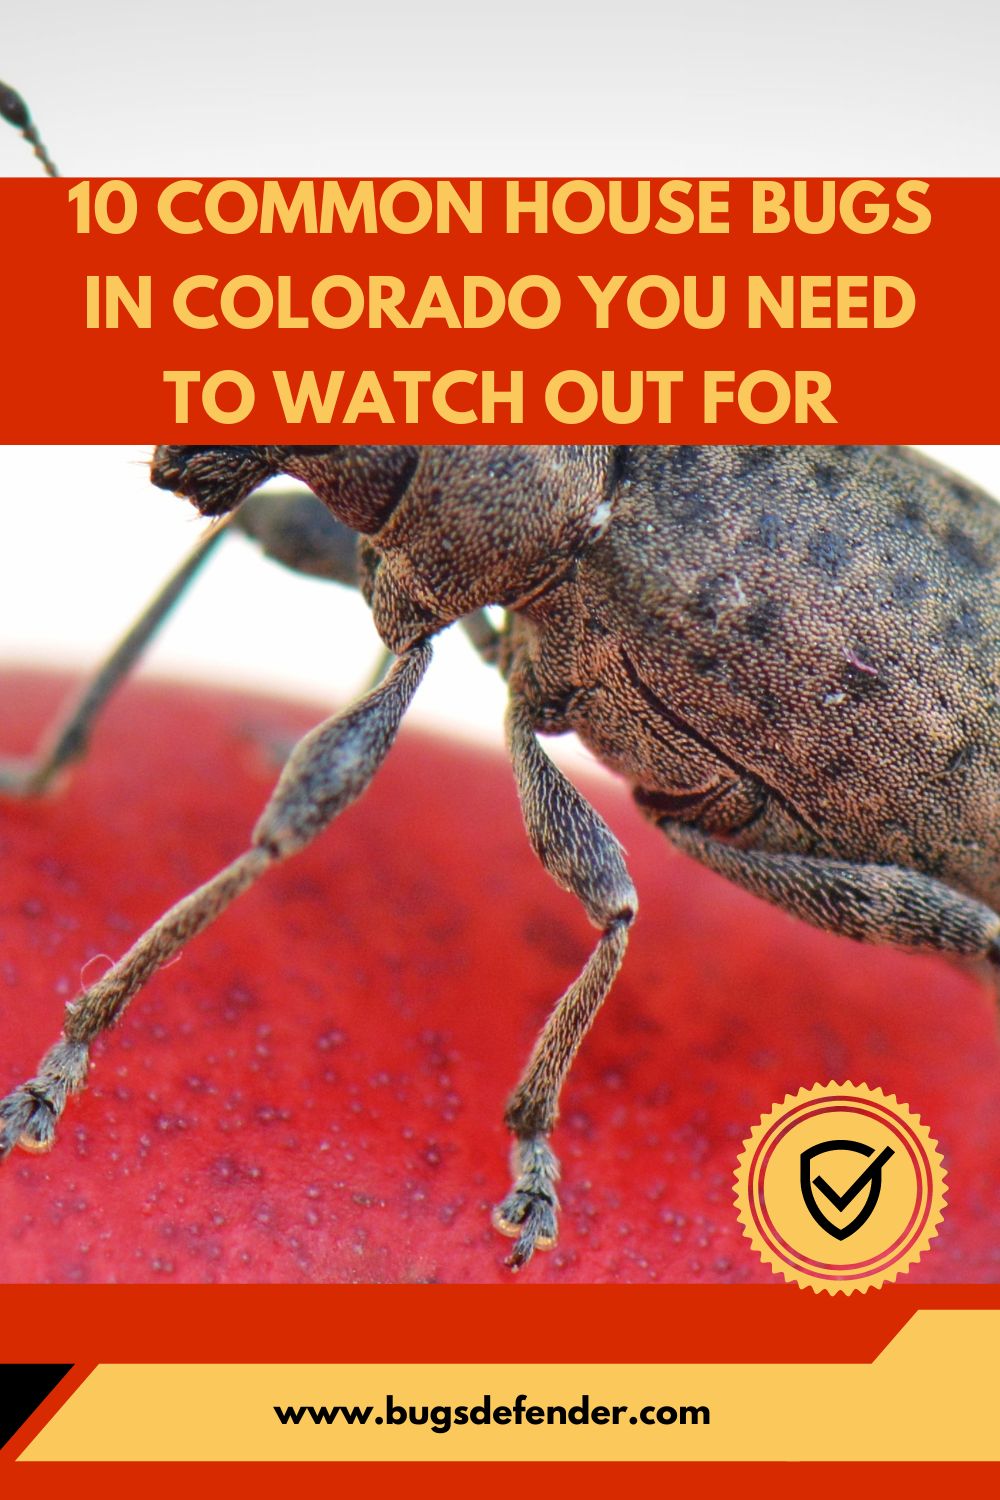 10 Common House Bugs In Colorado You Need To Watch Out For pin 2